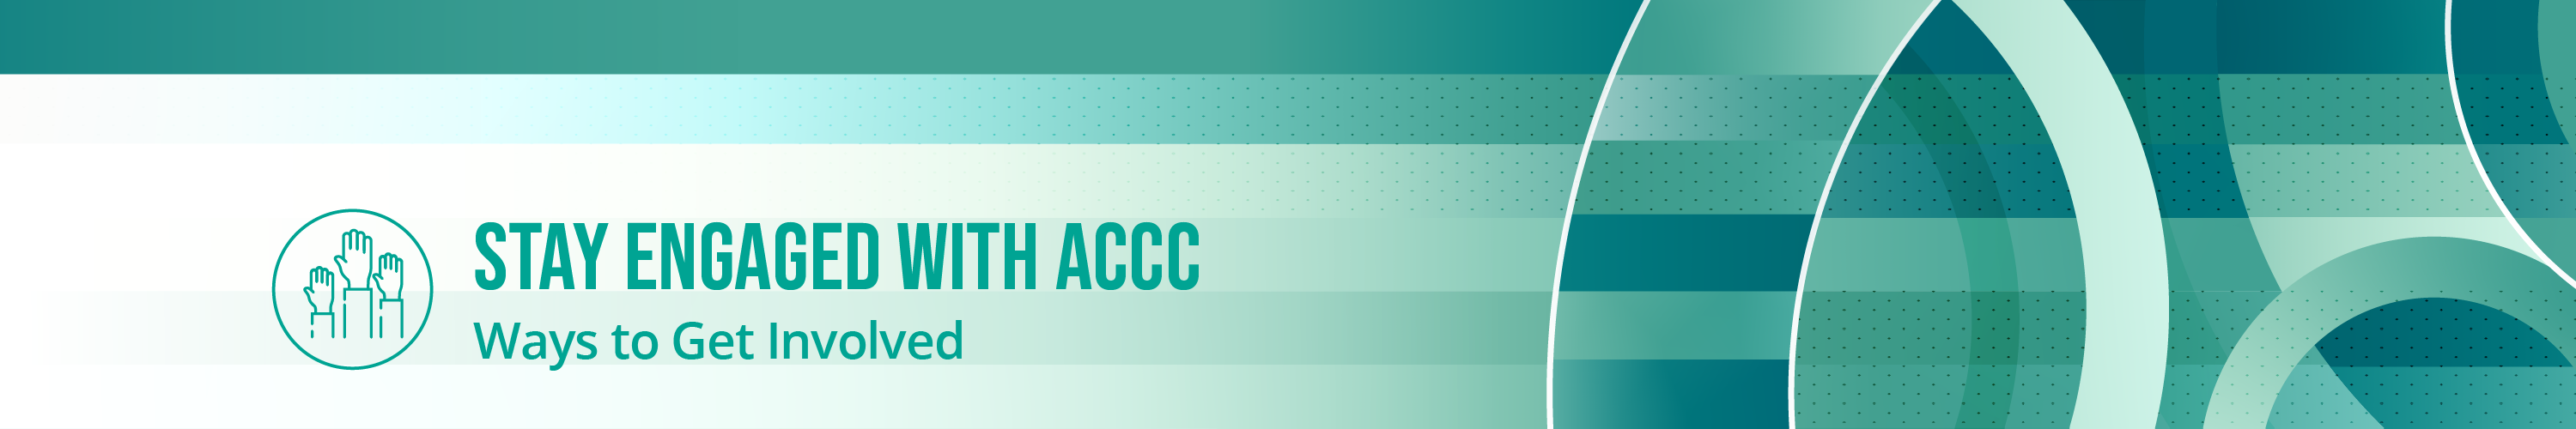 Stay Engaged with ACCC: Ways to Get Involved